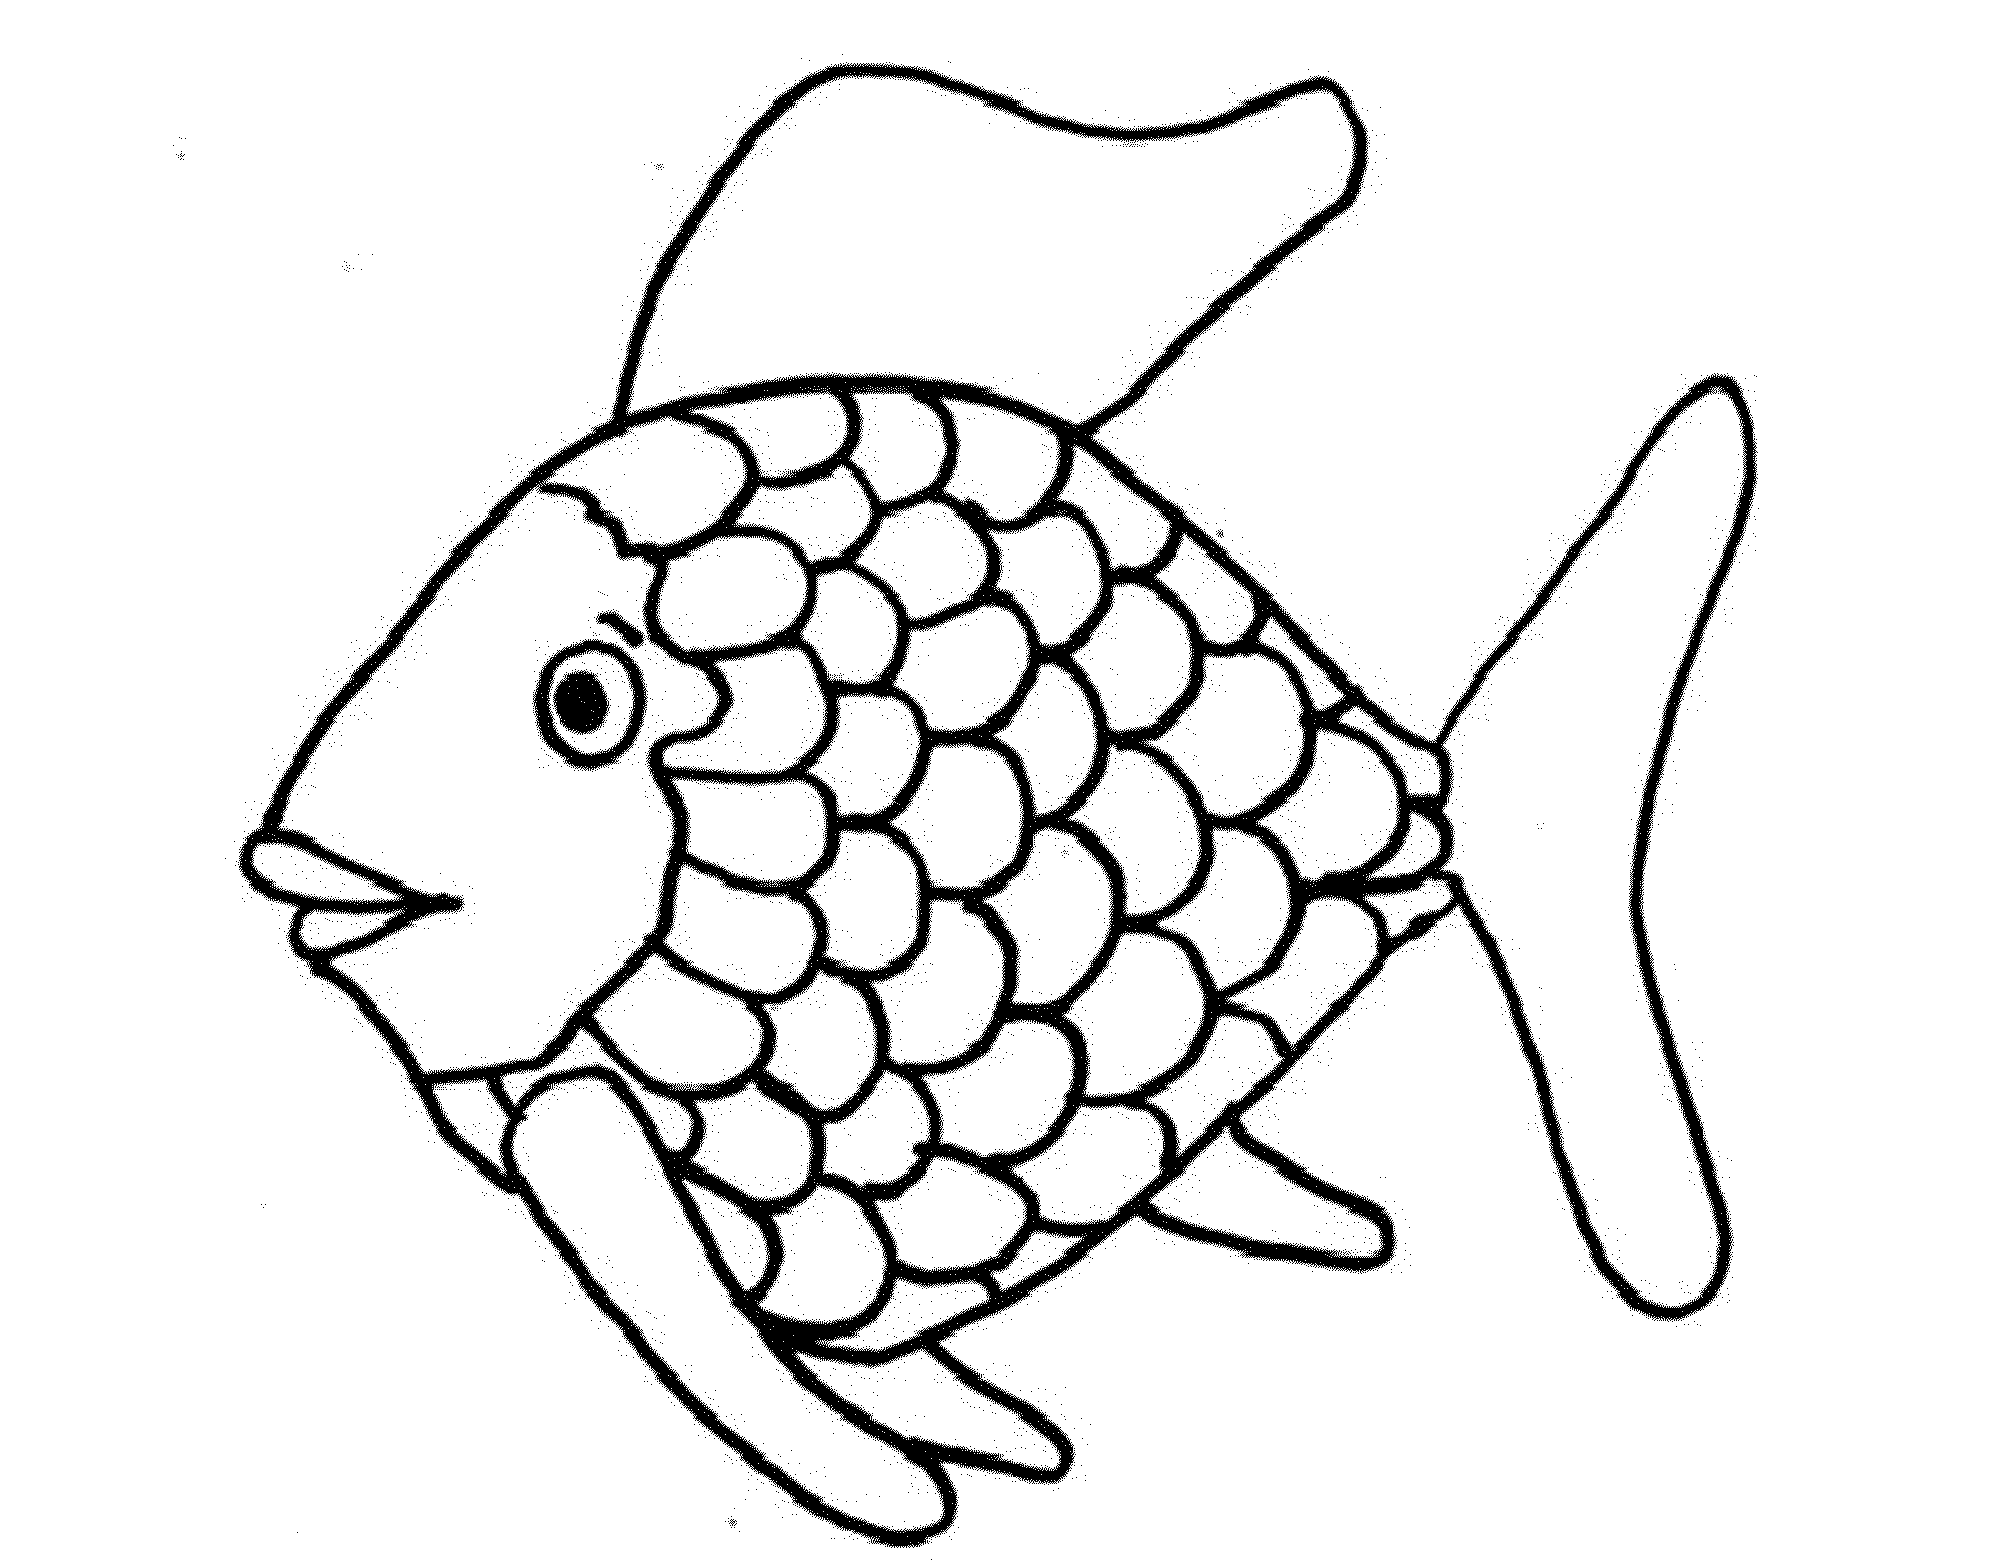 rainbow fish images free free rainbow fish template download free clip art free rainbow free images fish 